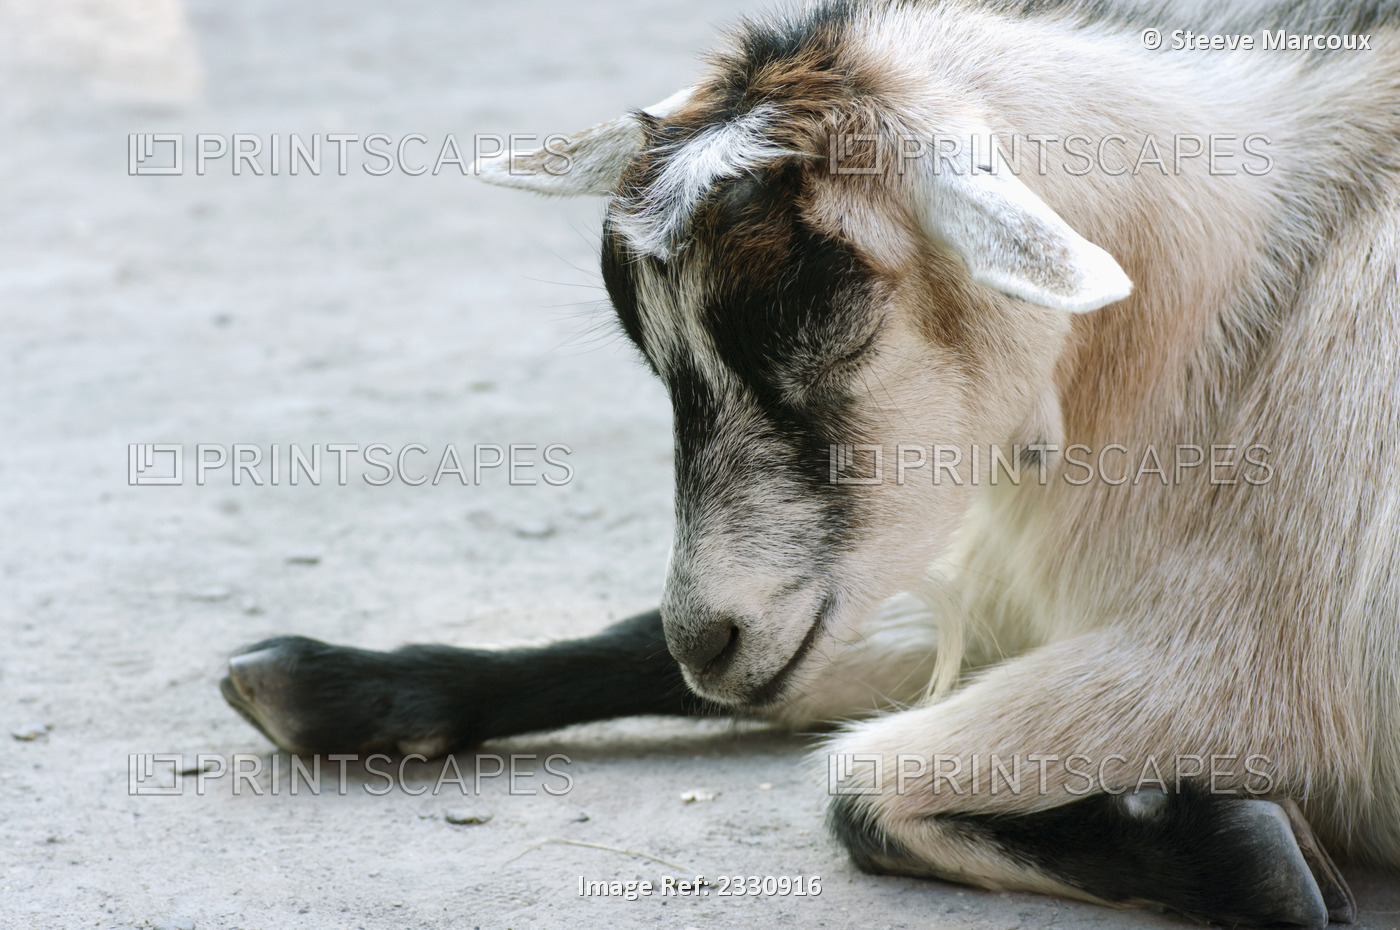 A goat at the granby zoo; Granby quebec canada